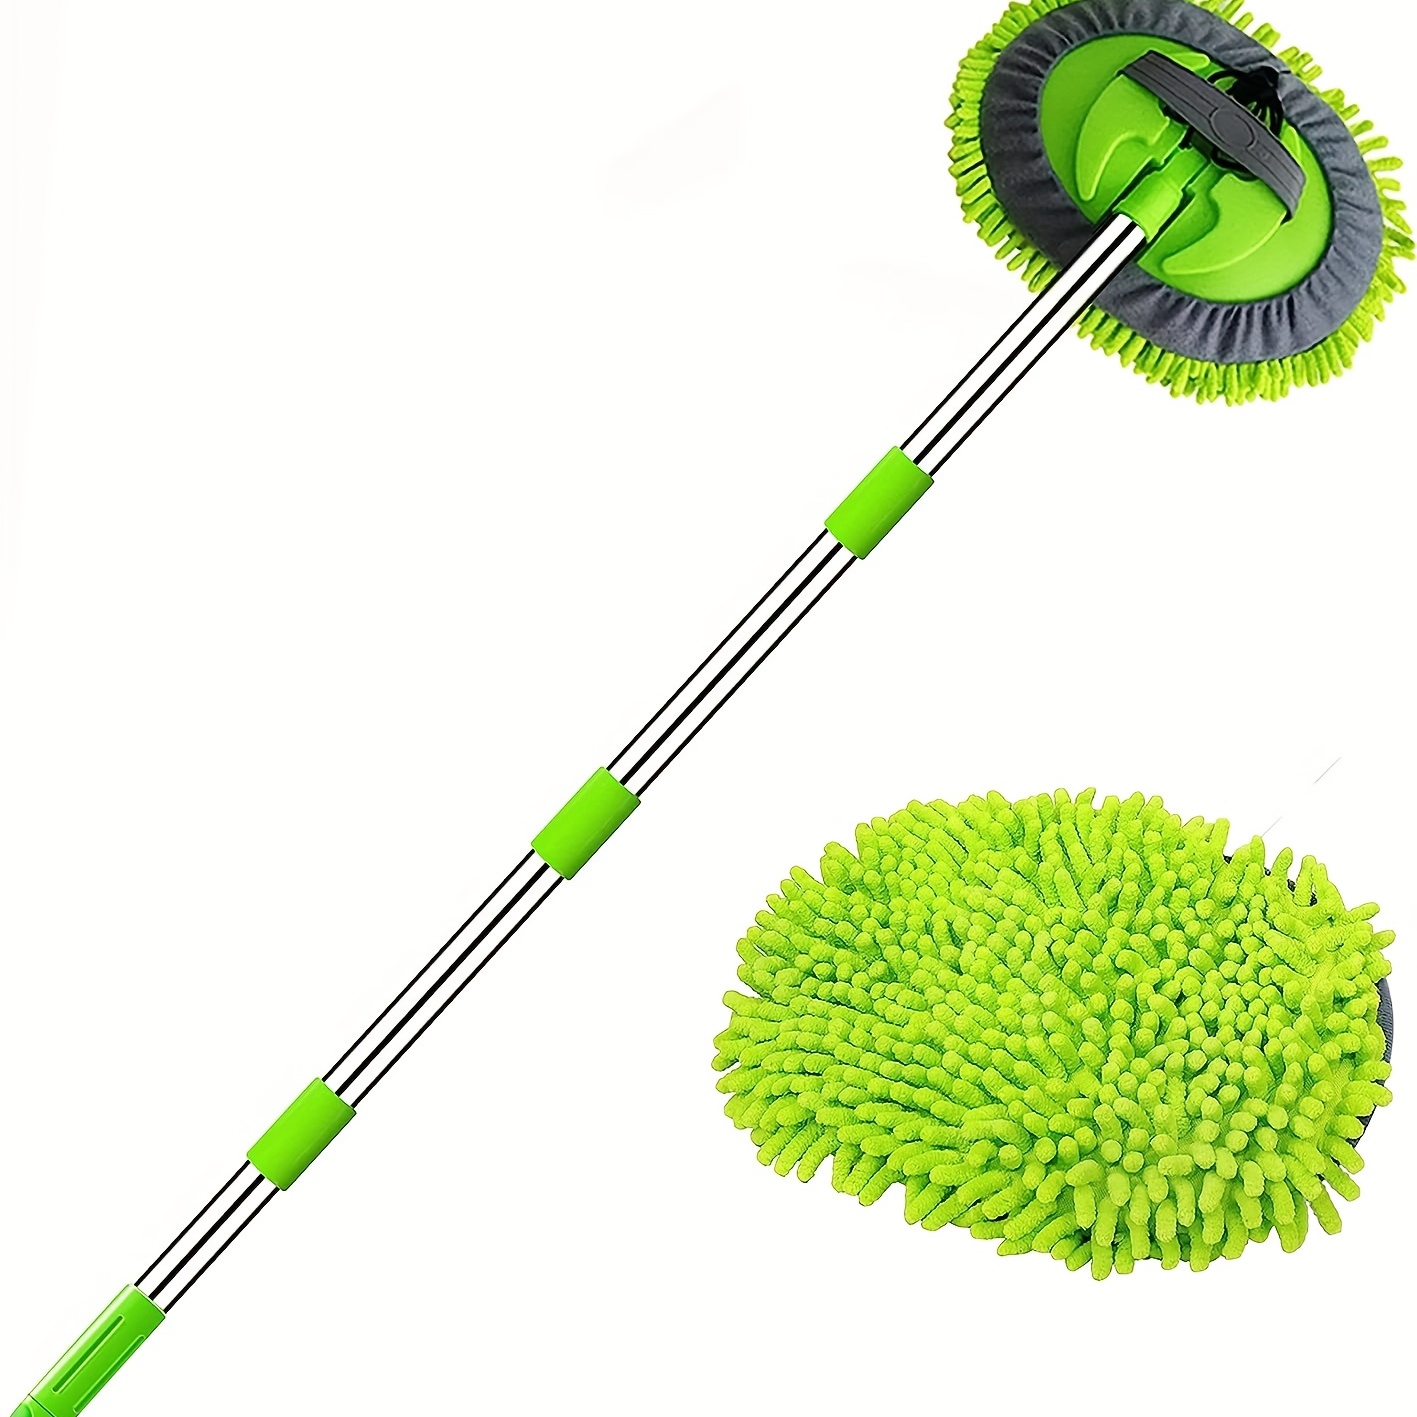 

63"car Wash Brush Mop With Long Handle Kit For Washing Detailing Cleaning Tool N Automotive Truck Suv Rv Trailer Sponge Duster Mitt Not Hurt Paint